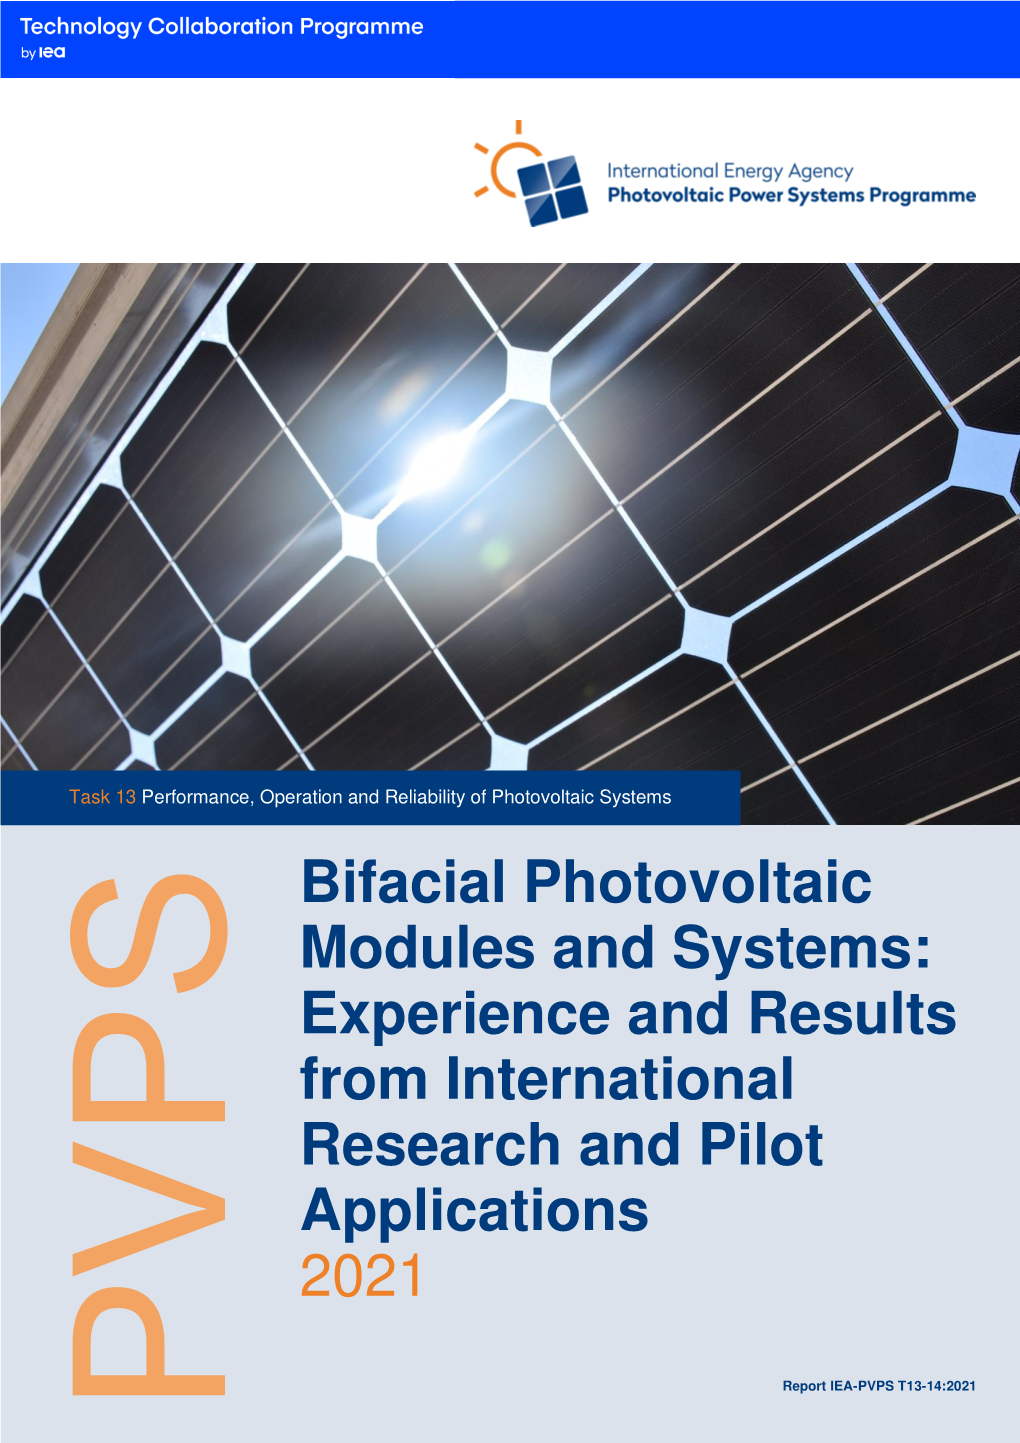 Bifacial Photovoltaic Modules and Systems